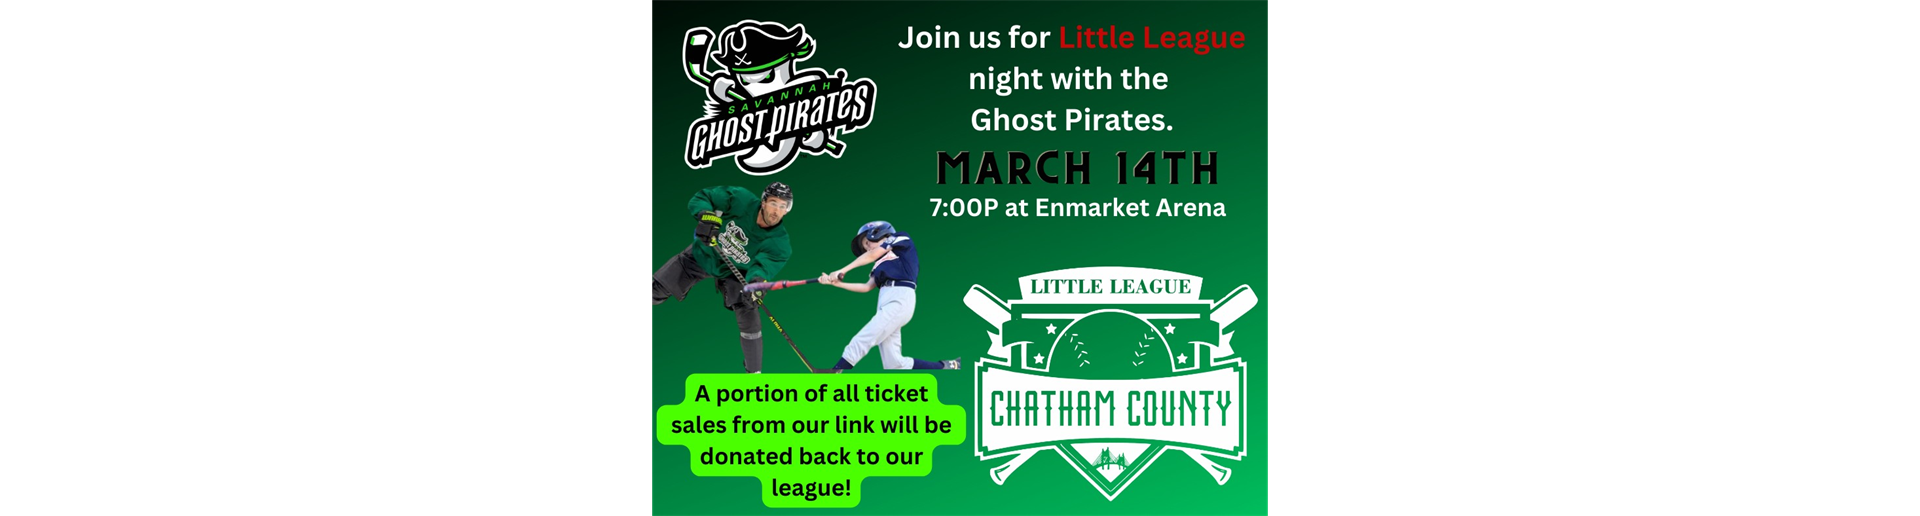 Joinj us for Little League Night with the Ghost Pirates 